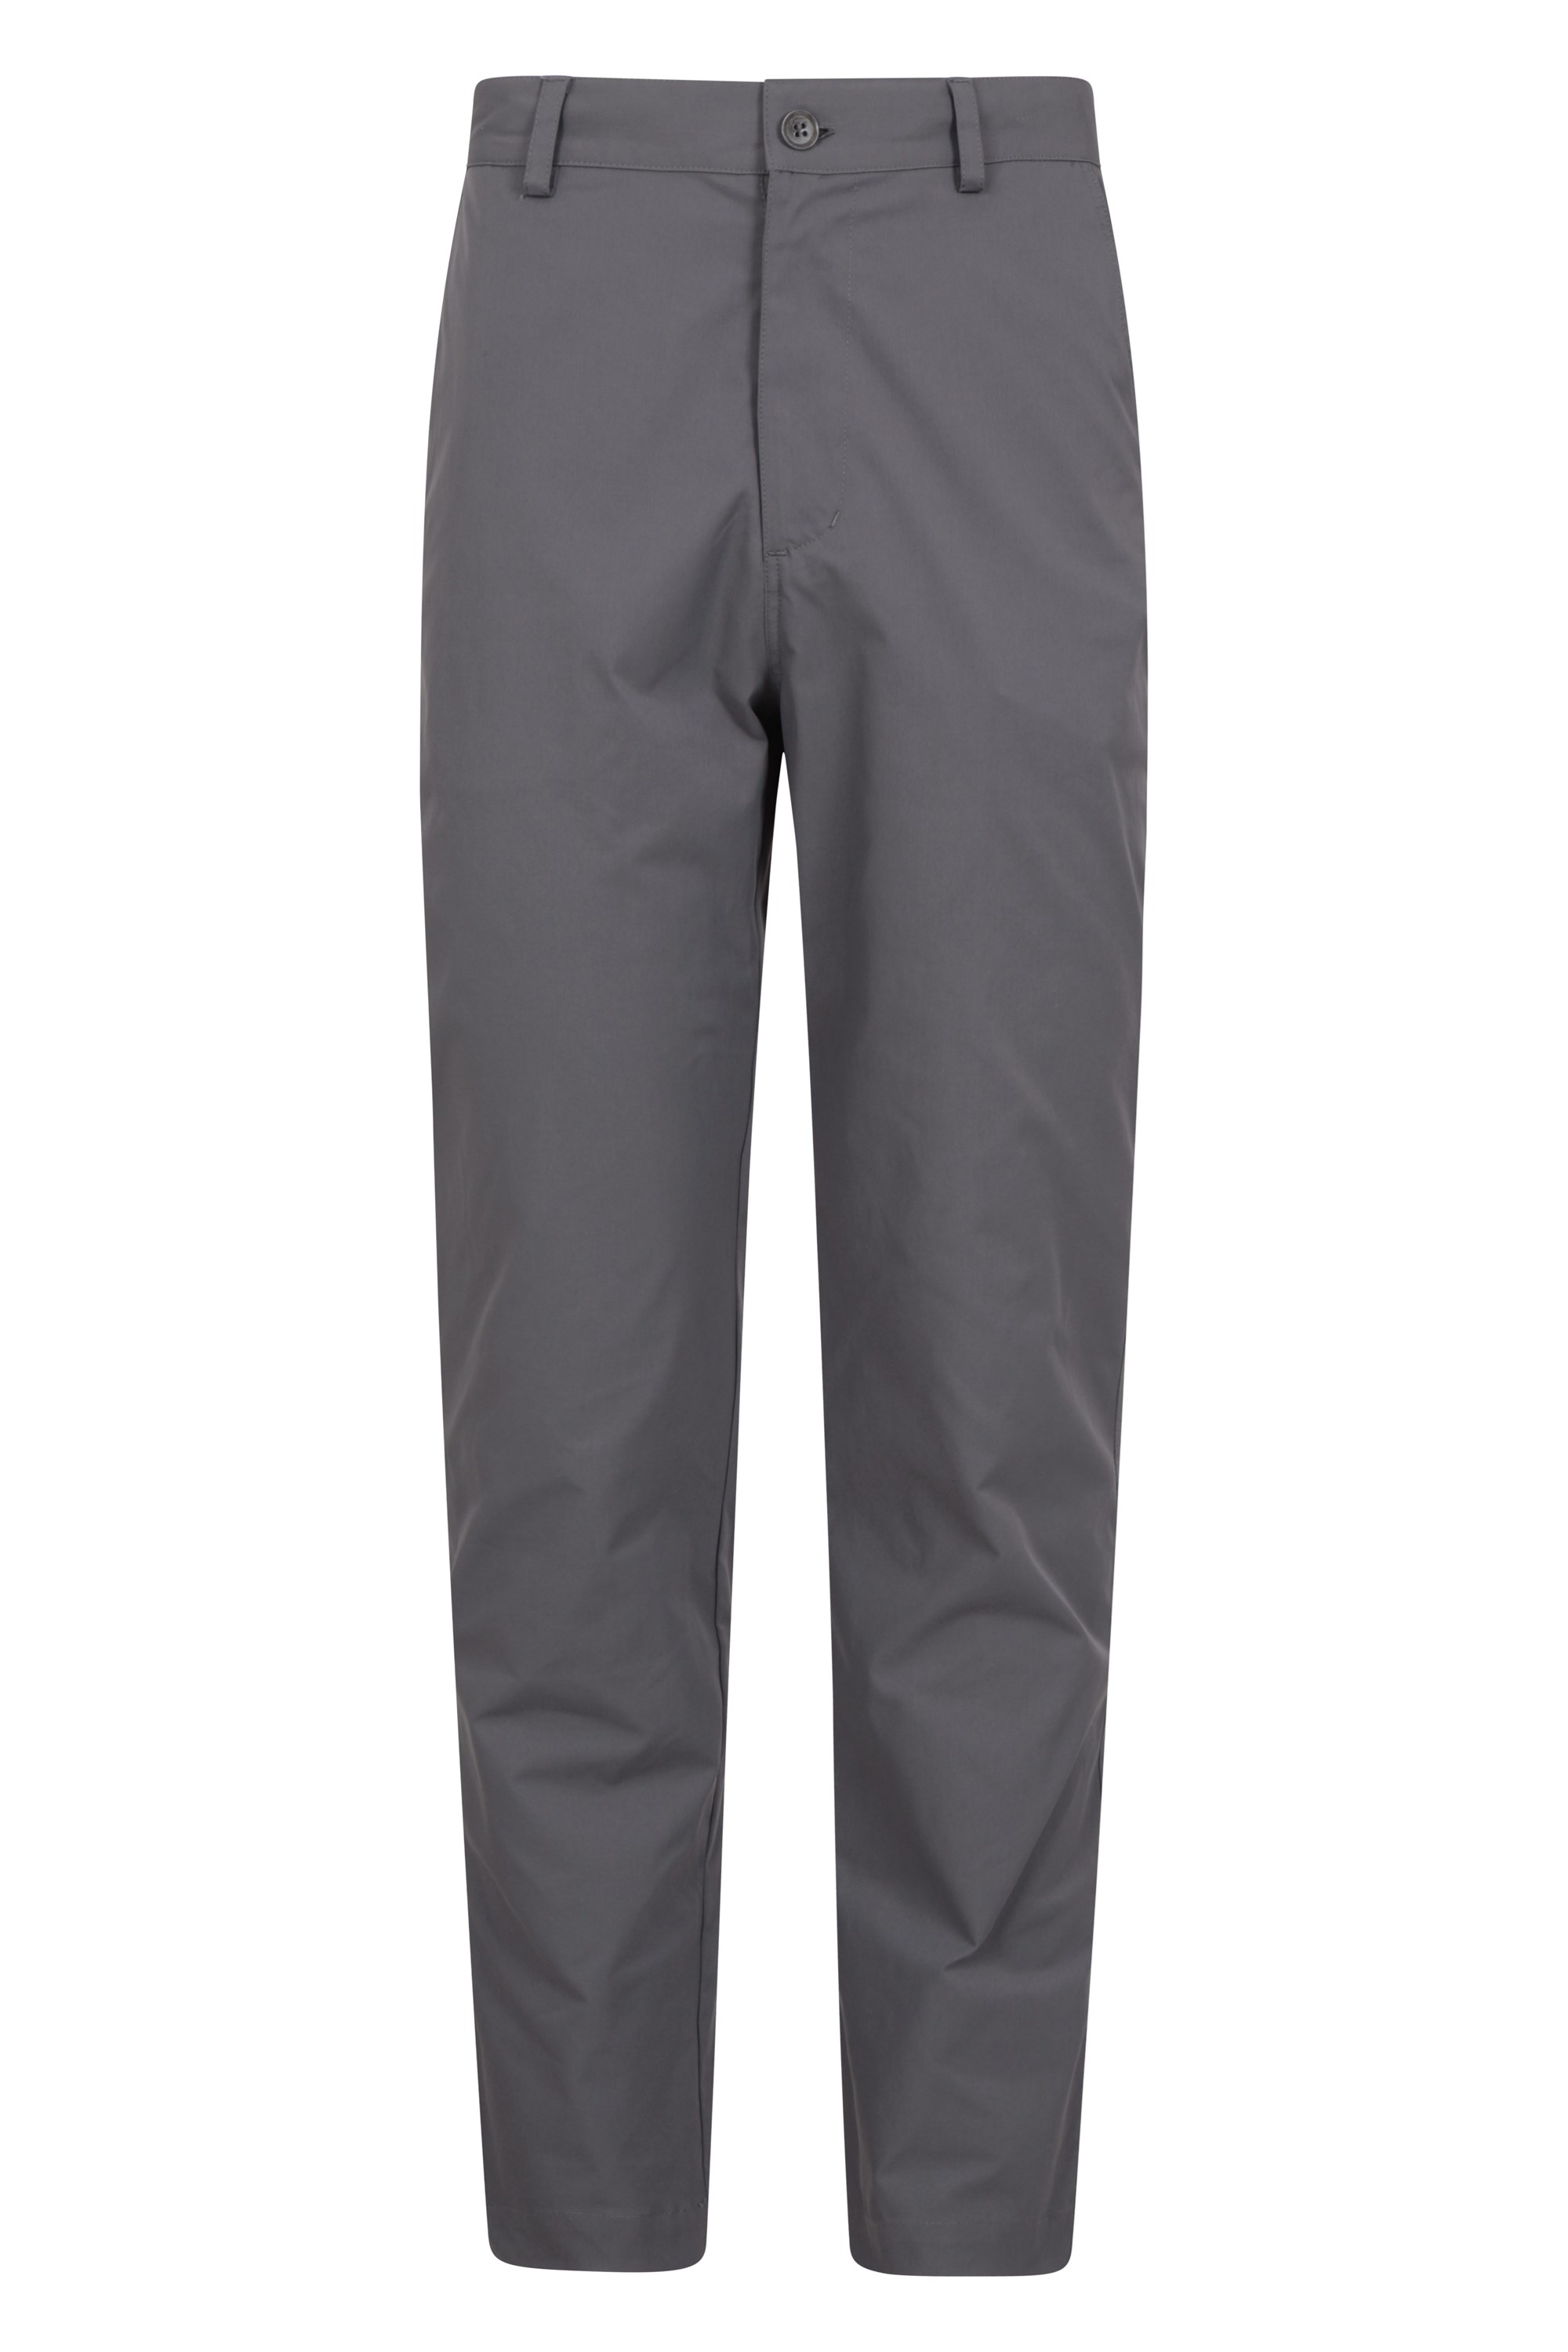 Adventure Mens Water Resistant Chino Trousers - Long Length - Grey